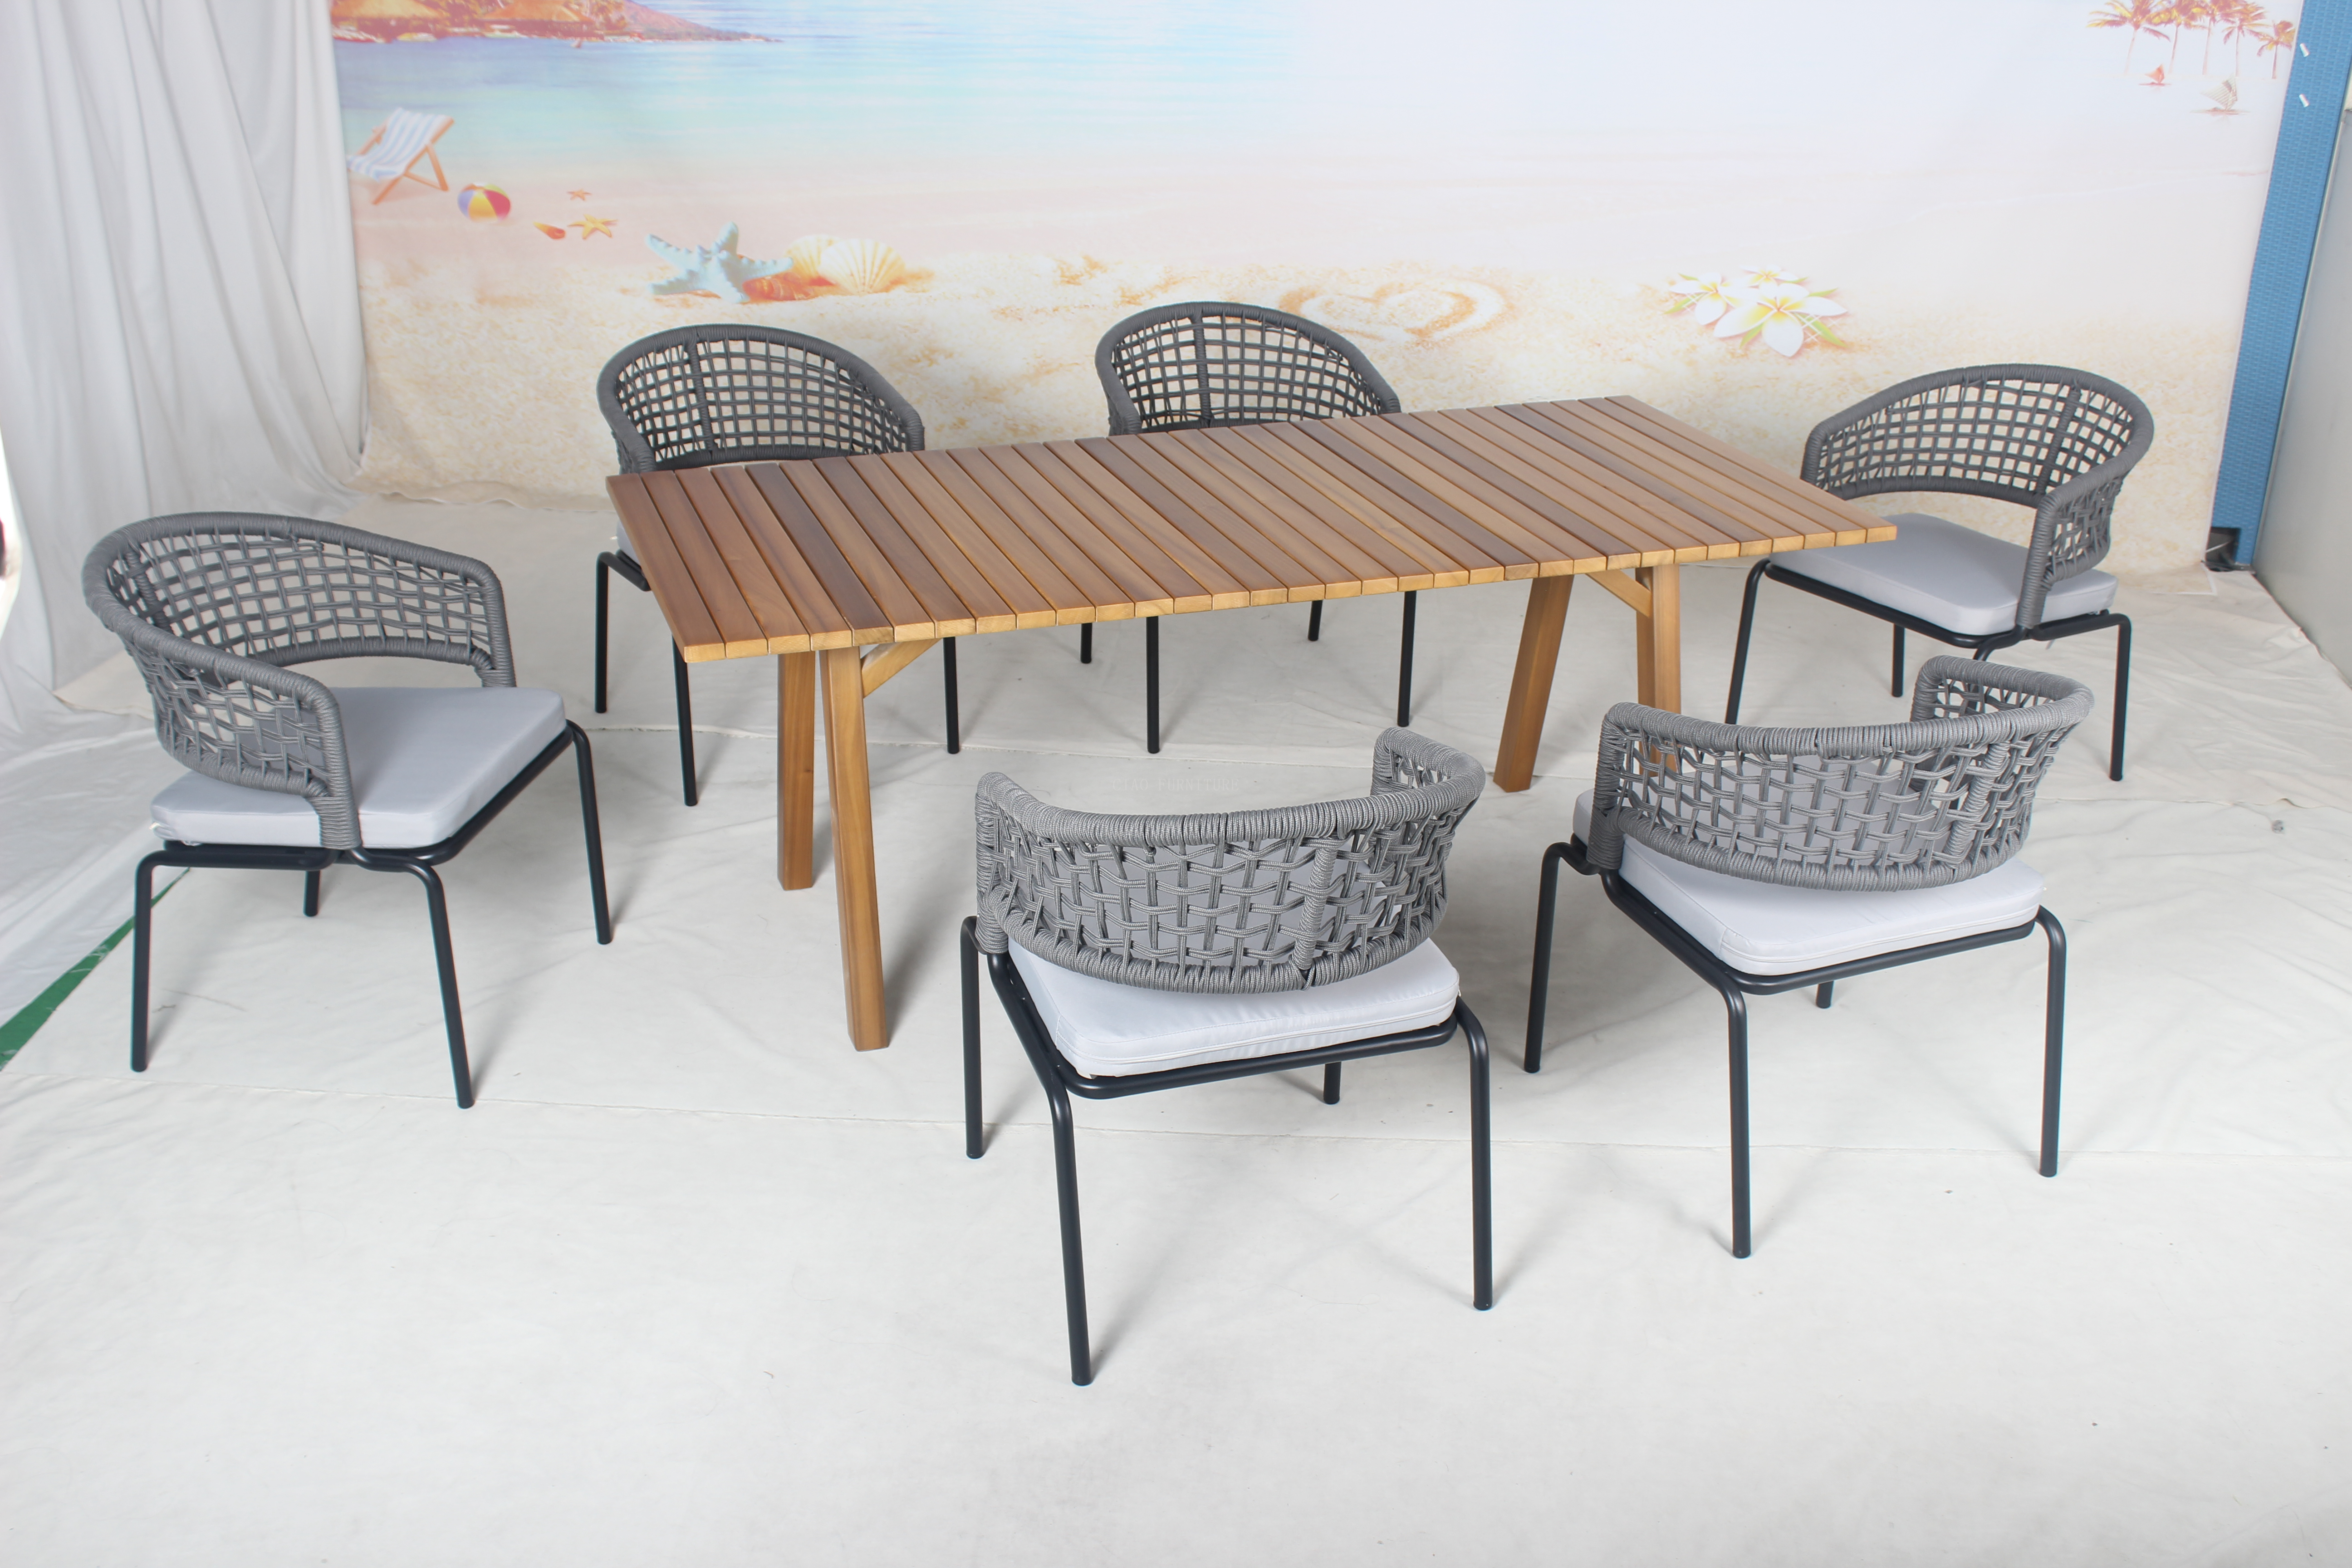 Aluminum outdoor hotel dining table and chairs